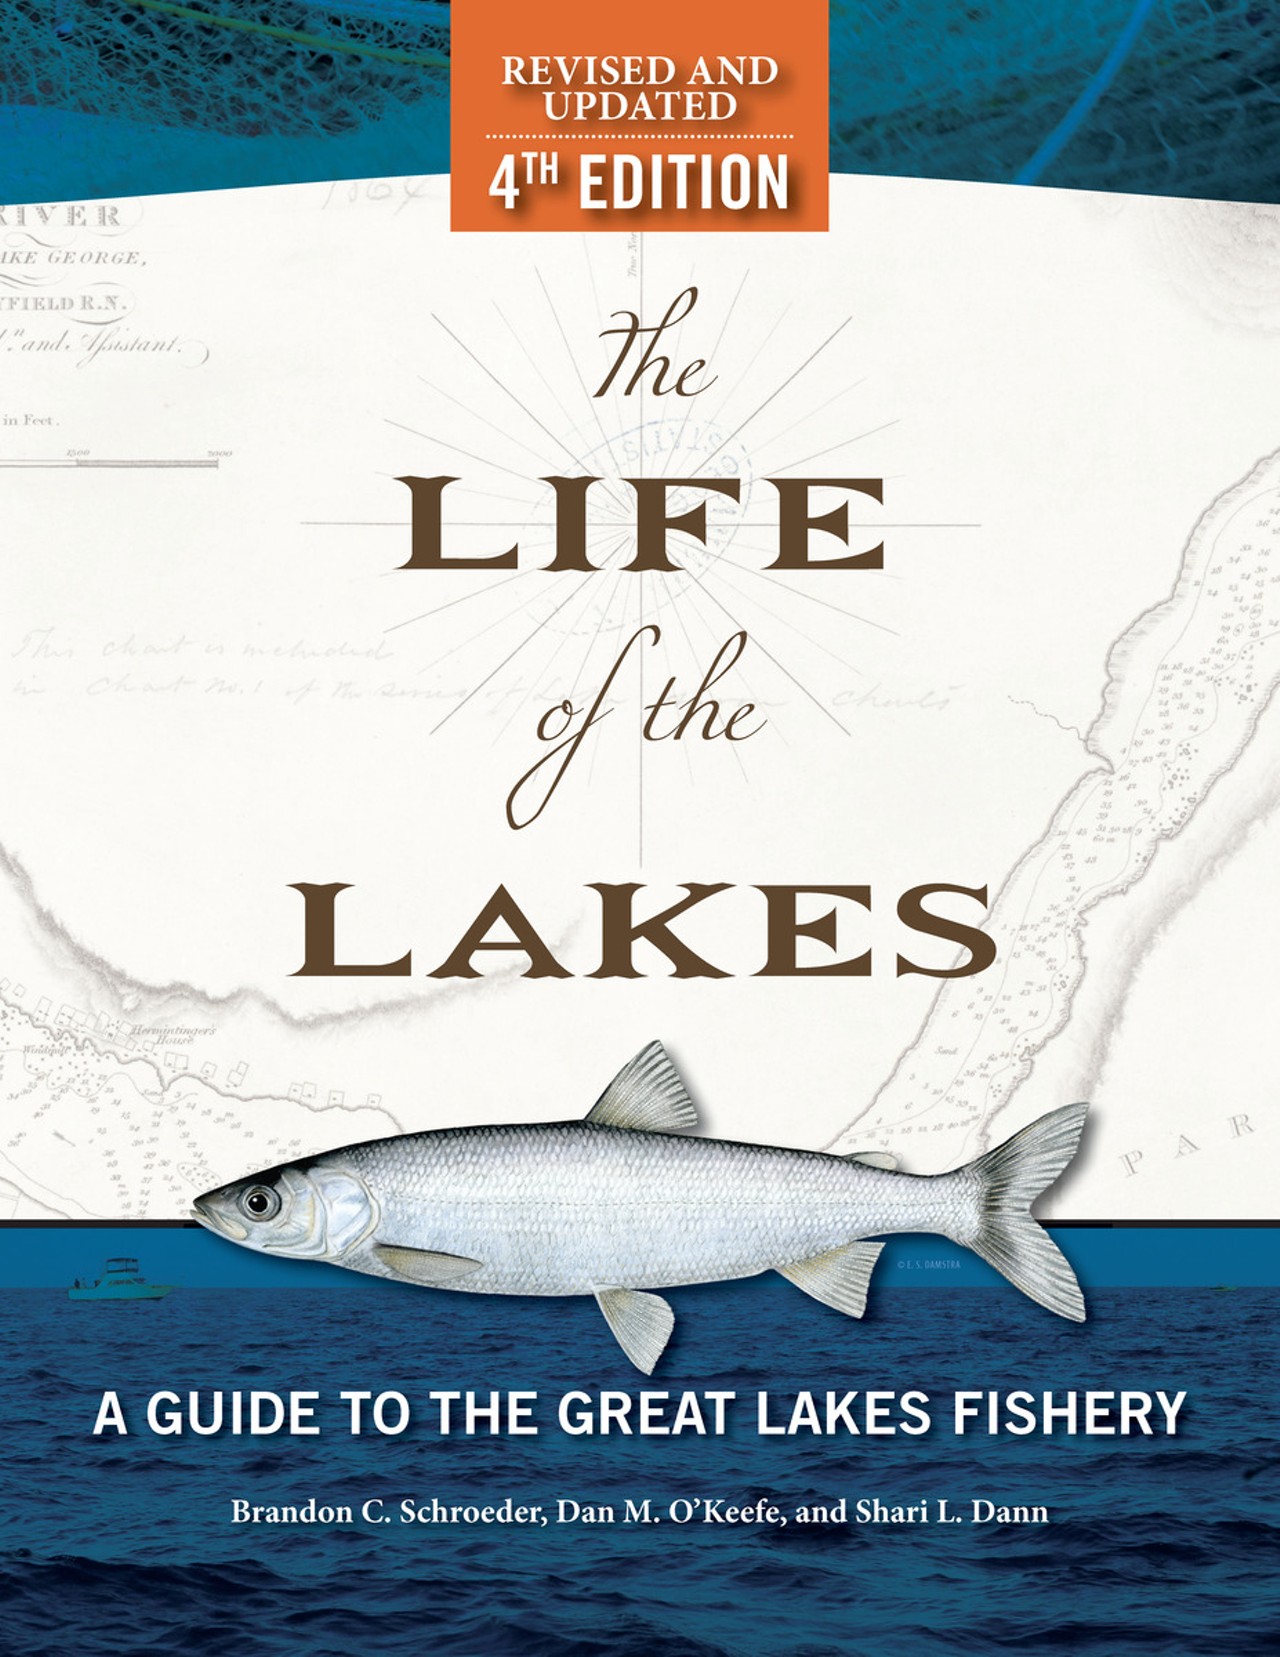 The Life of the Lakes, 4th Ed.: A Guide to the Great Lakes Fishery
In addition to providing revenue through the commercial fishing industry, the Great Lakes fishery is also a backbone for tourism in eight different states and two countries, attracting millions to the five lakes each year. The newest edition of The Life of the Lakes emphasizes the complexity of the fisheries in the Great Lakes, which are one of the region&#146;s most precious natural resources though often taken for granted. Published in collaboration with Michigan Sea Grant, a cooperative program of the University of Michigan and Michigan State University, the book details the history of the lakes, current issues, and what the murky future of Michigan&#146;s beloved waters. Printed in full color and chock-full of graphics and illustrations, the new edition offers an engaging view into the five Great Lakes.